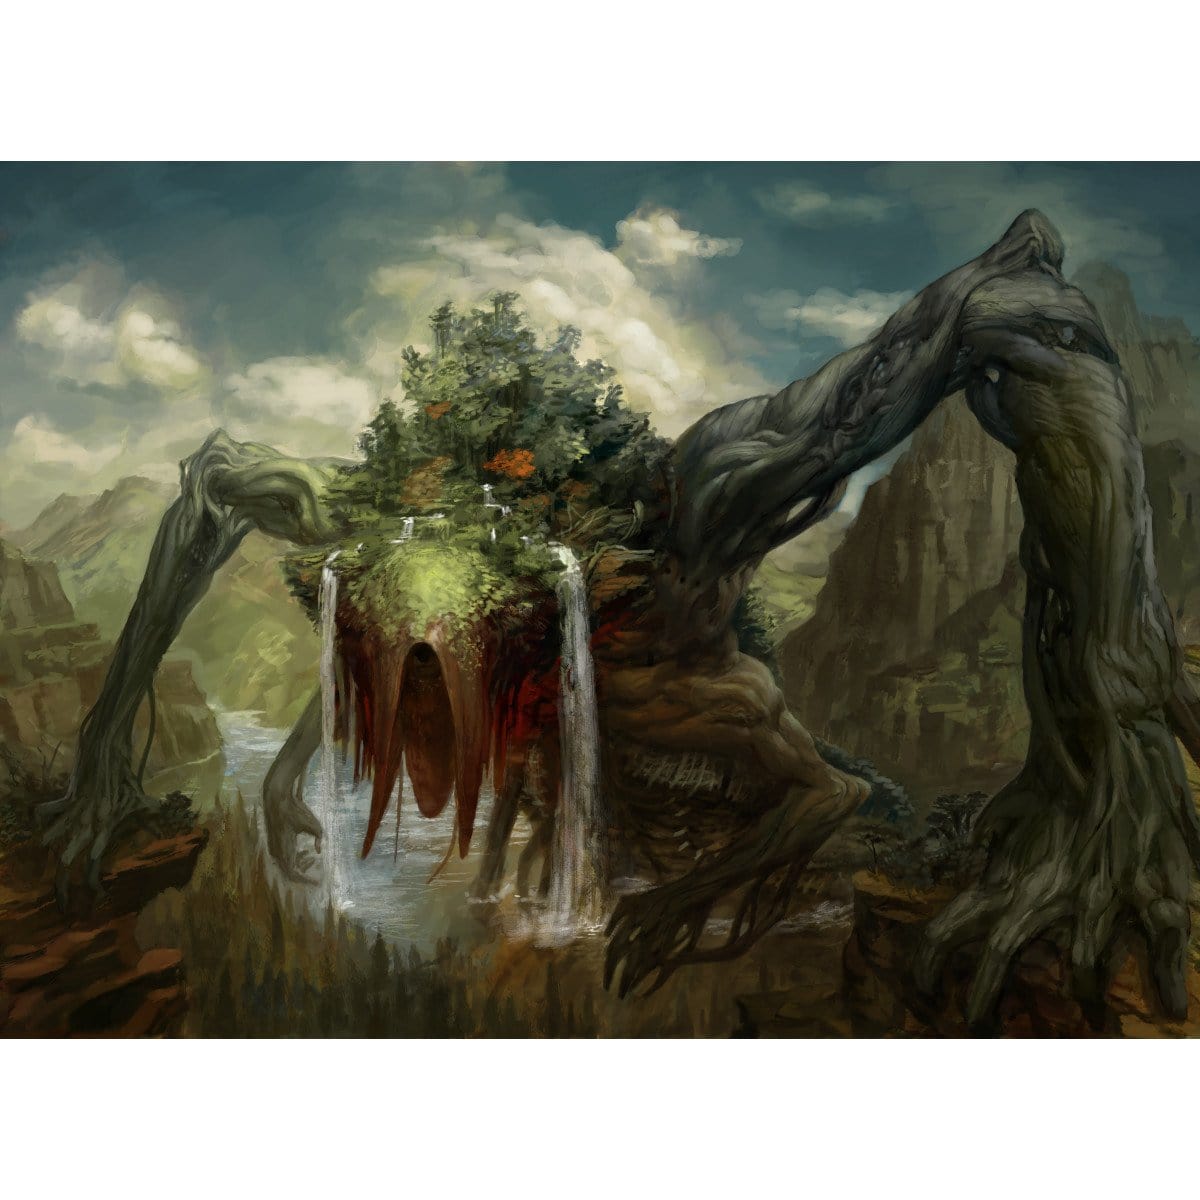 Animar, Soul of Elements Print - Print - Original Magic Art - Accessories for Magic the Gathering and other card games